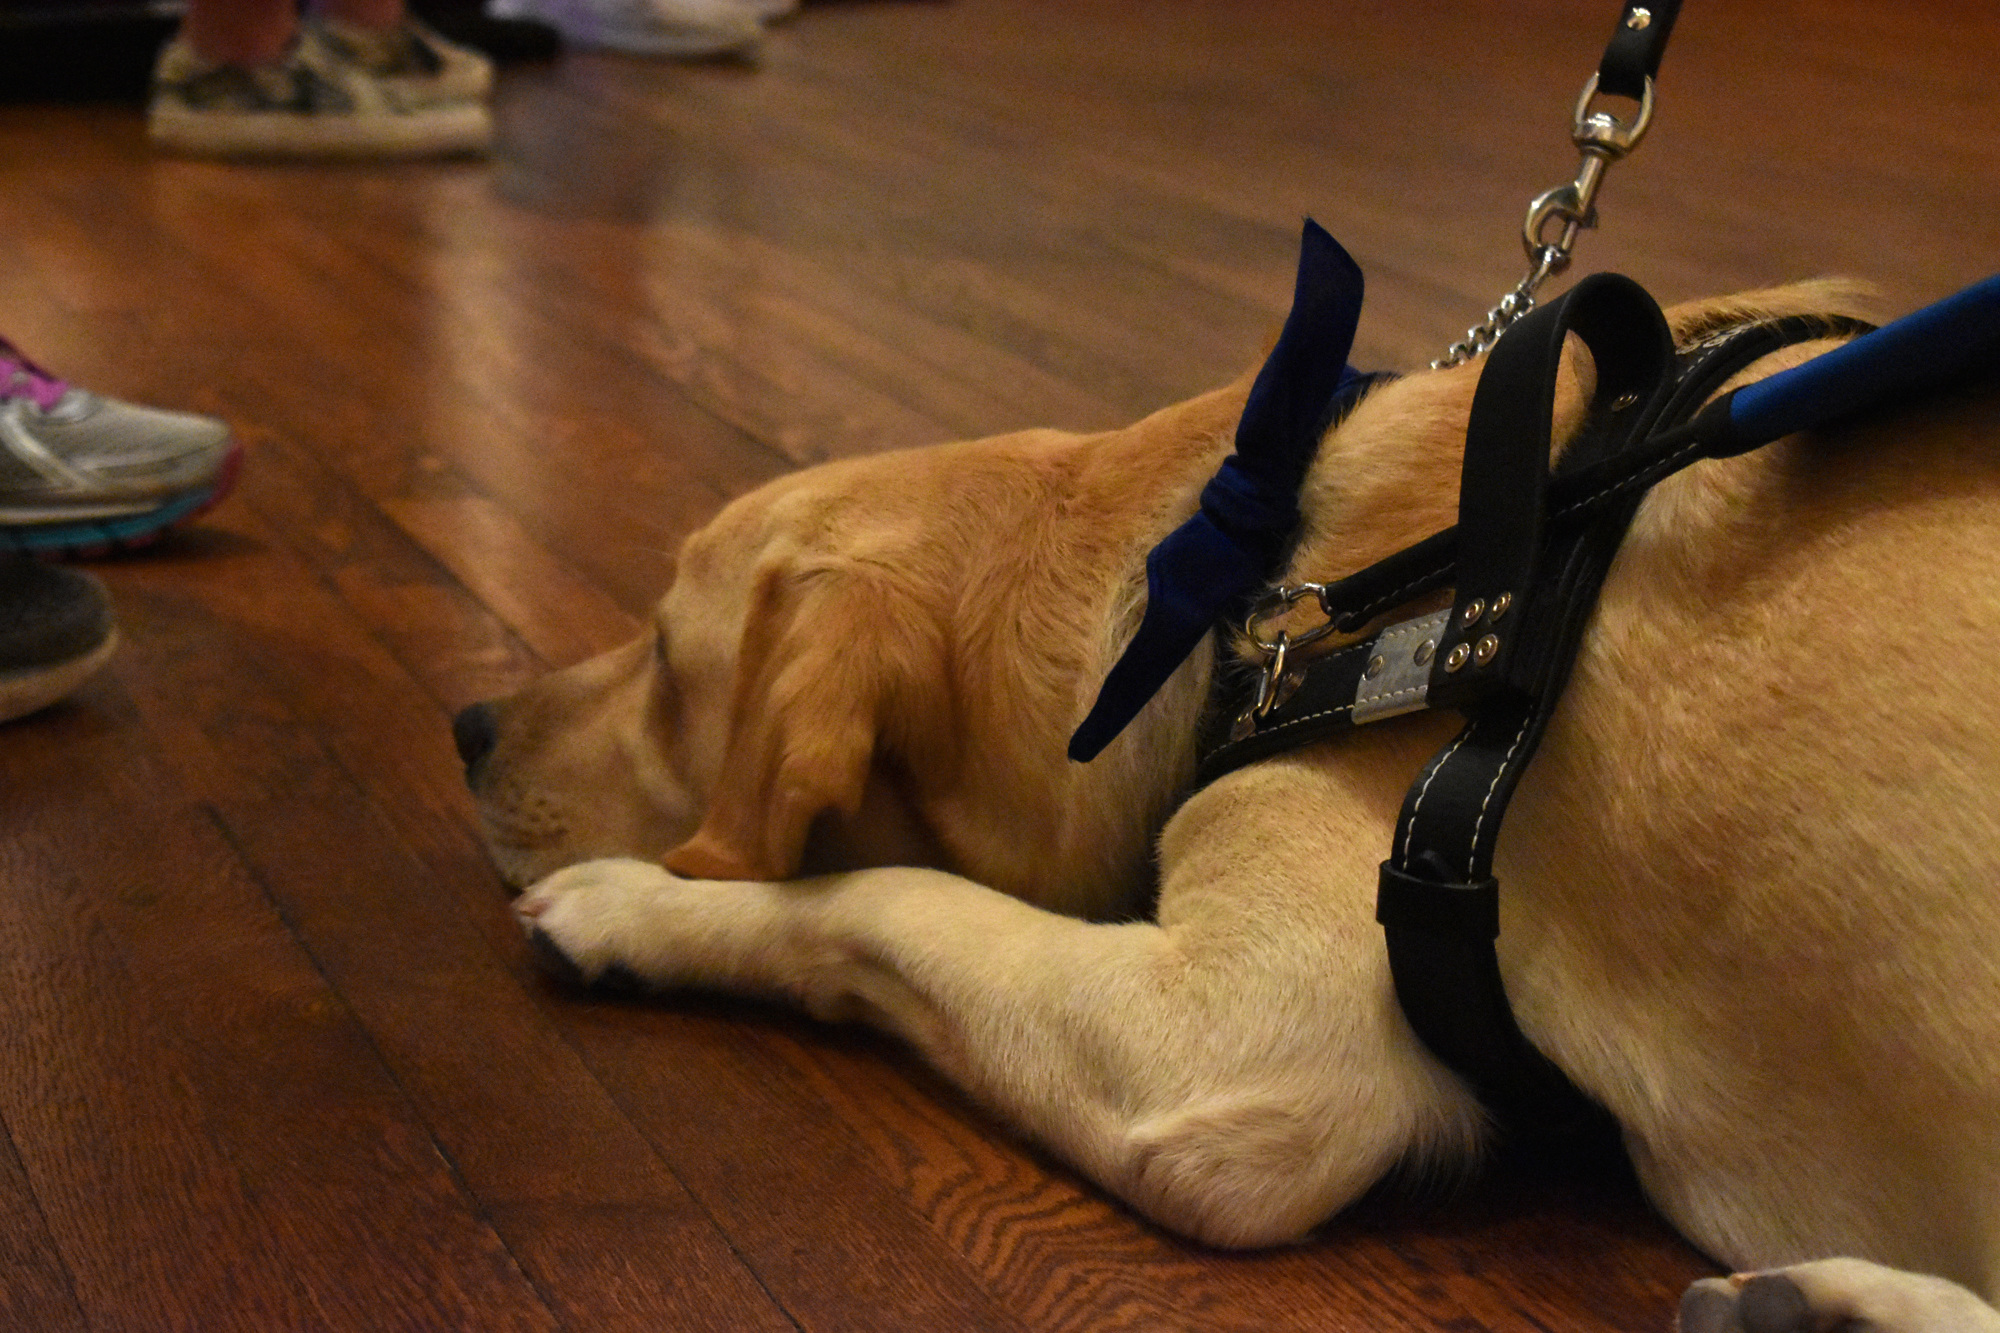 Pauline Thurston's one-year-old guide dog Fidelity rests at her feet. Photo by Niki Kottmann